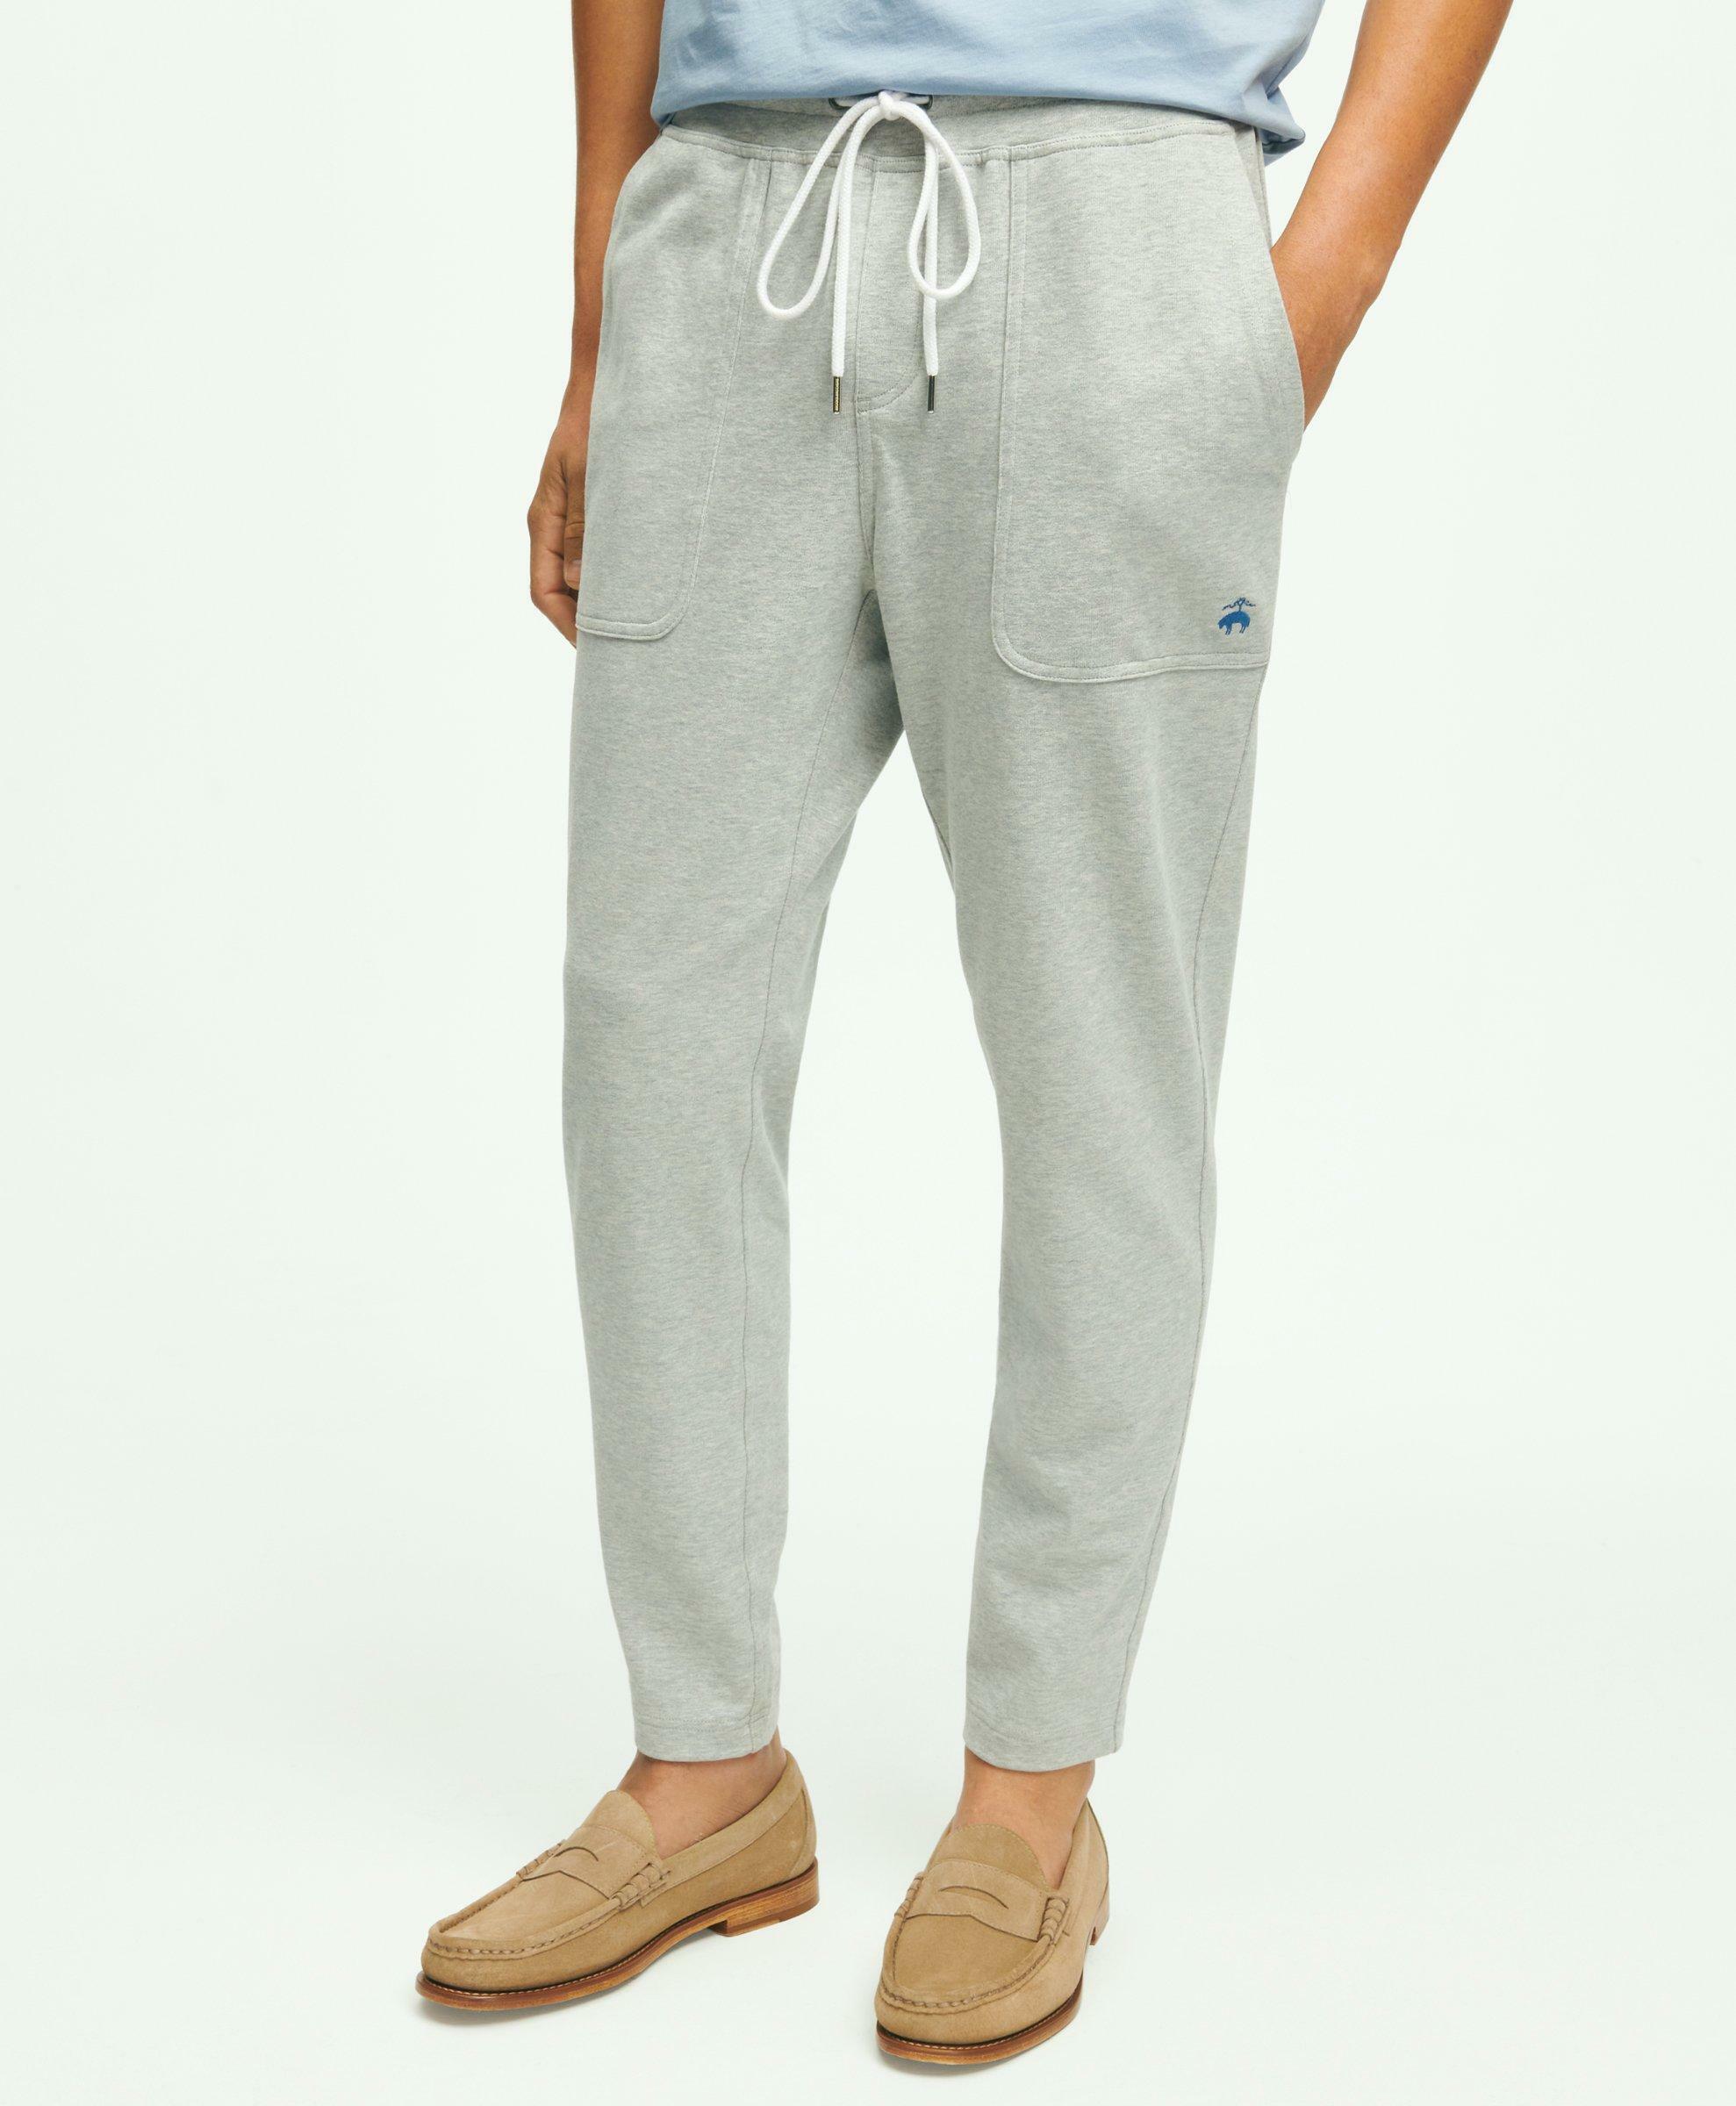 Brooks Brothers Men's Stretch Sueded Cotton Jersey Sweatpants | Grey